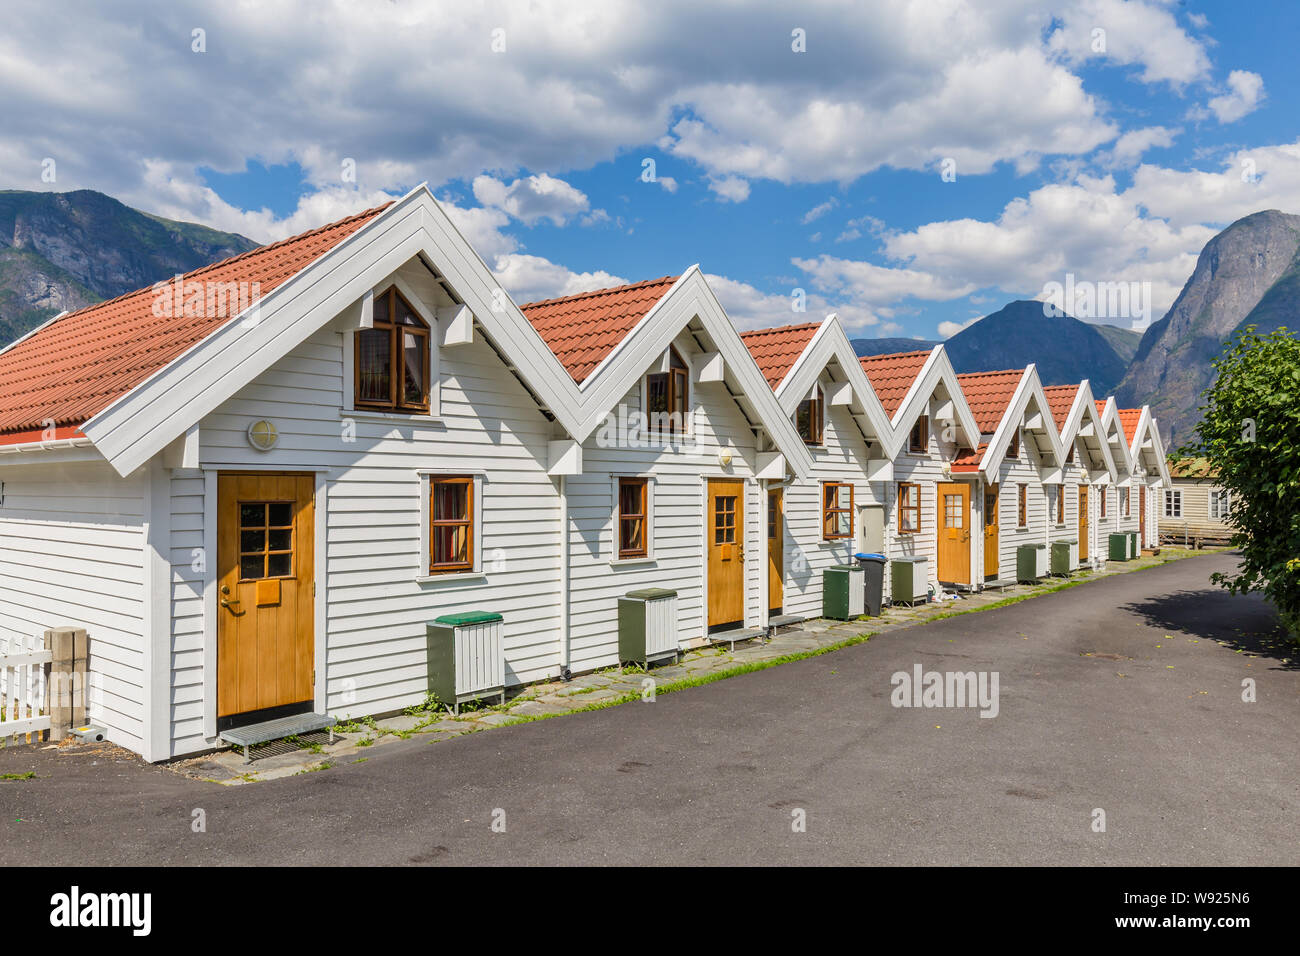 Beautiful traditional white wooden houses in Aurlandsvangen at the coast of Aurlandsfjord, branche of Sognefjord in Norway Stock Photo